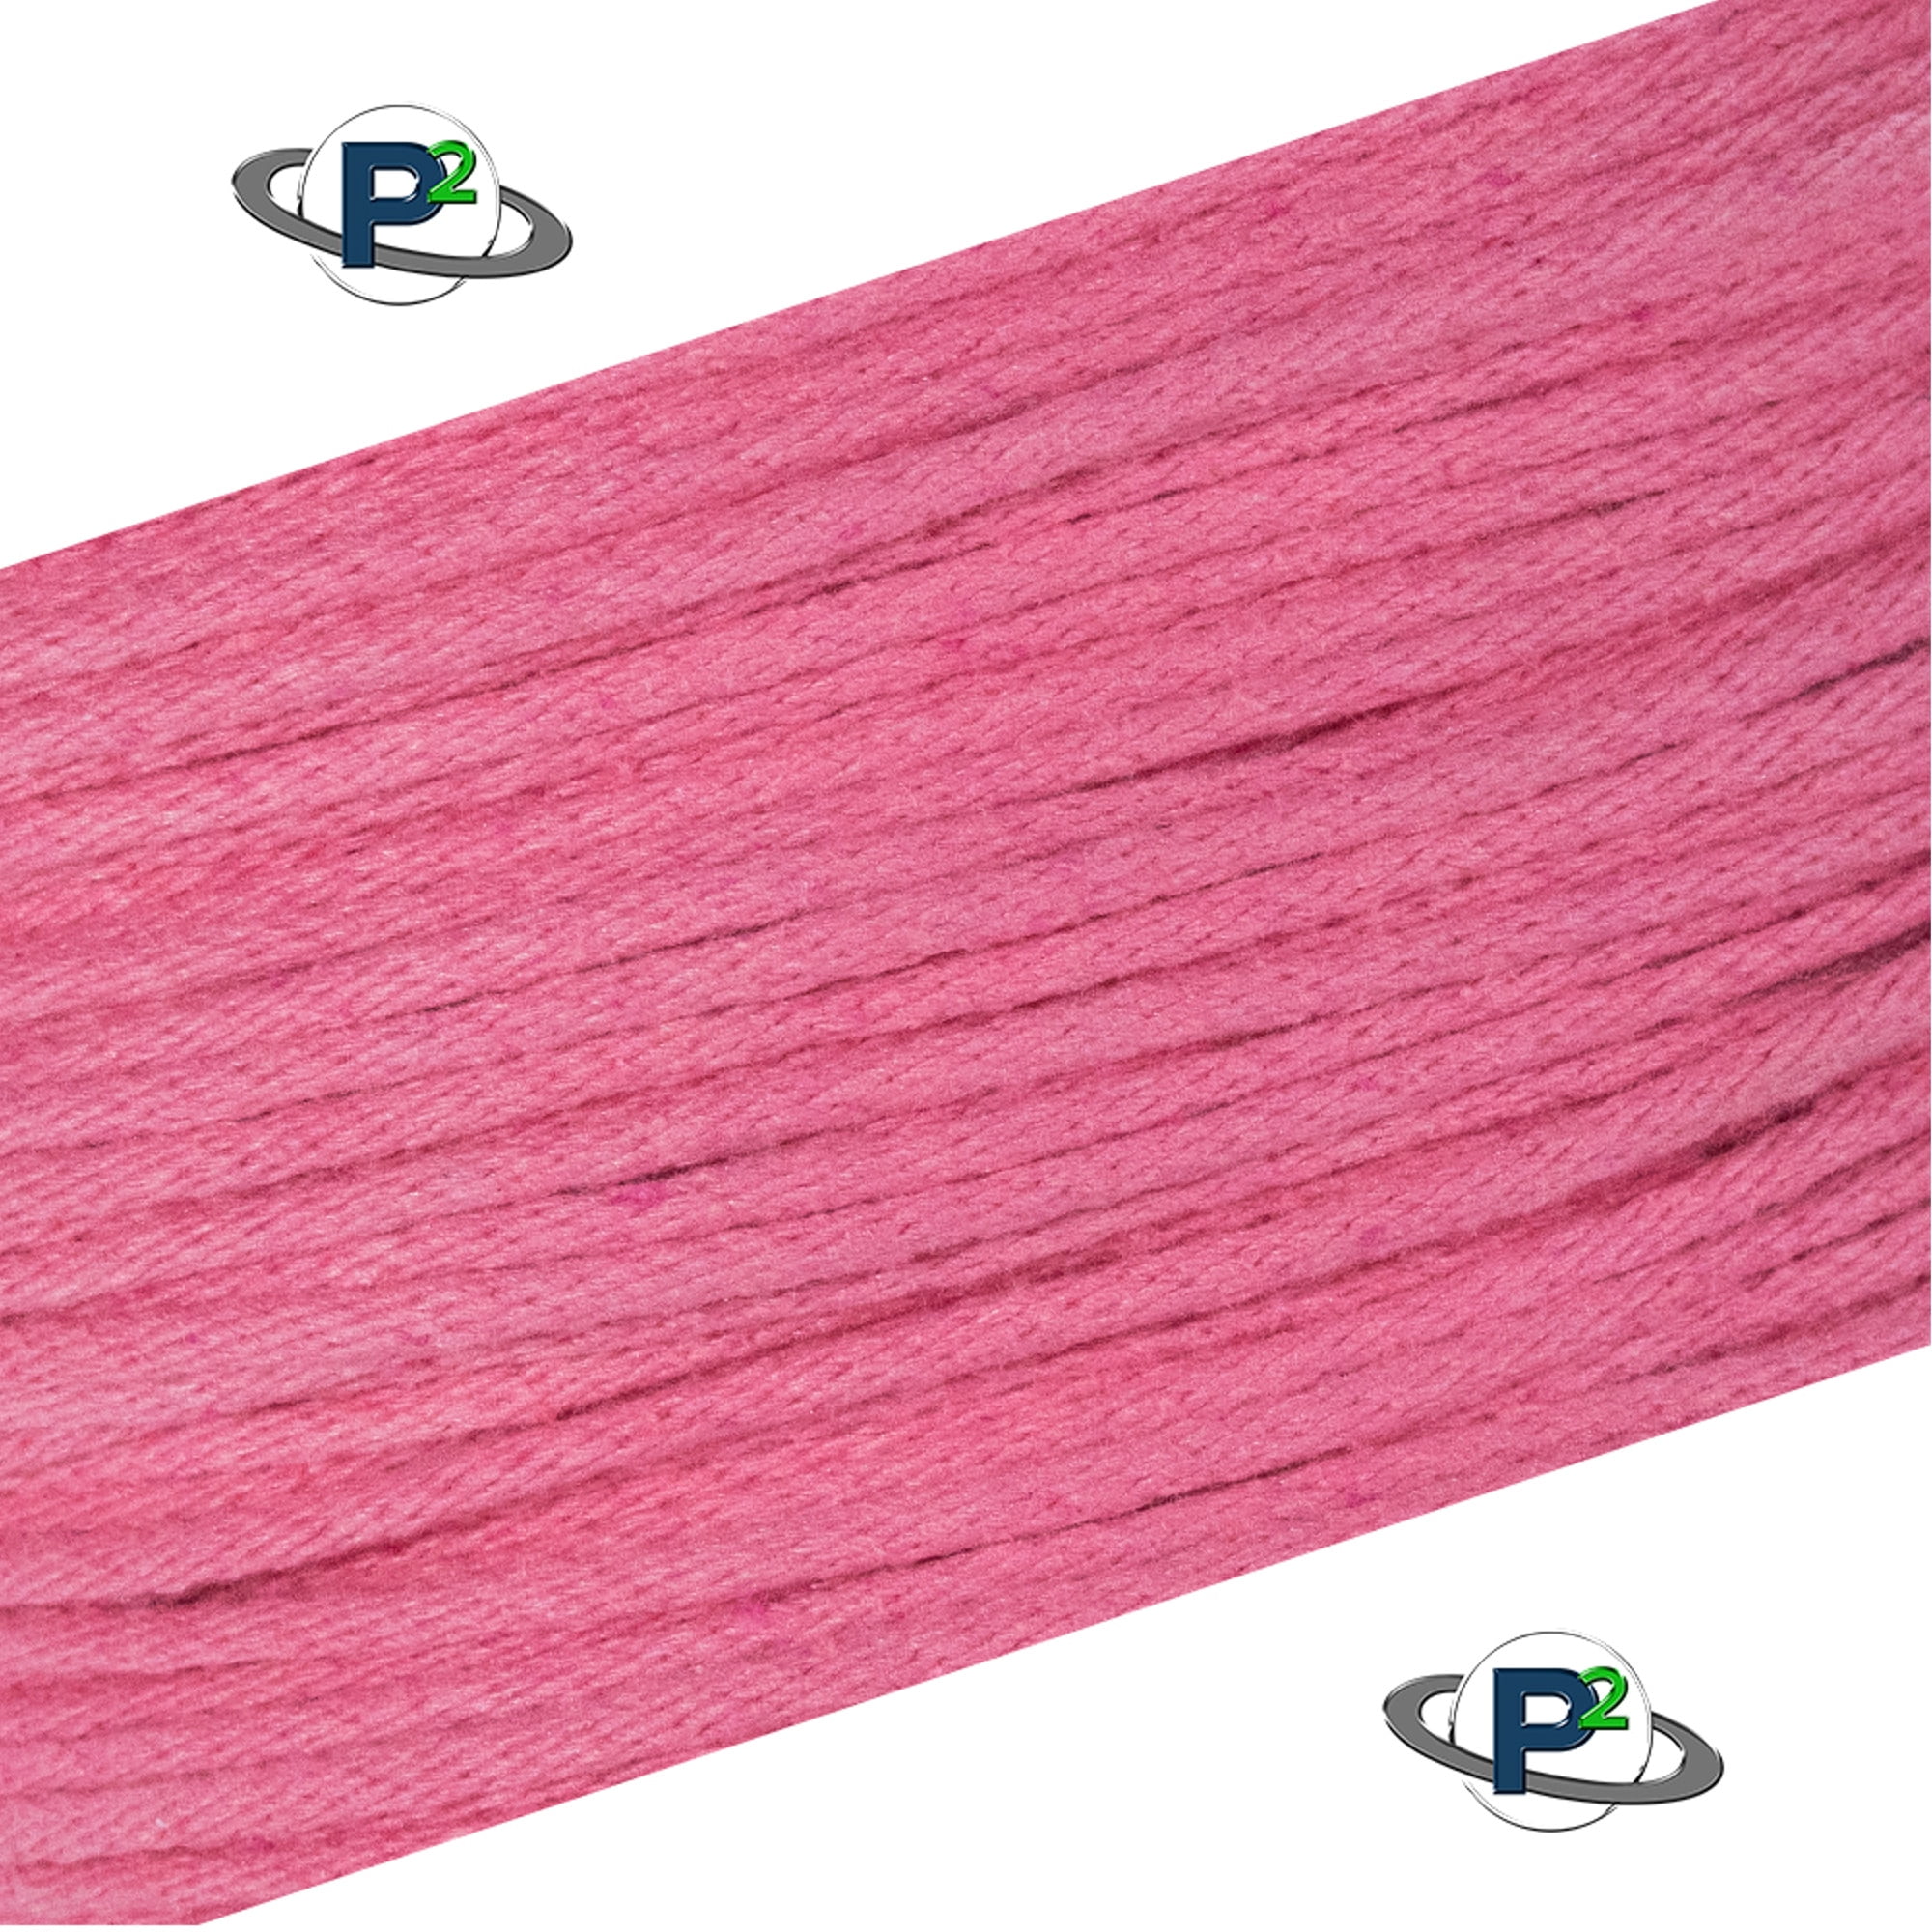 1/2 1/4 50 Twisted 3 Strand Natural Cotton Rope Artisan Cord 1 Inch Diameters 10 100 Feet Wine Red, 1/2 Inch x 50 Feet 5/8 25 Super Soft White and Assorted Colors 3/4